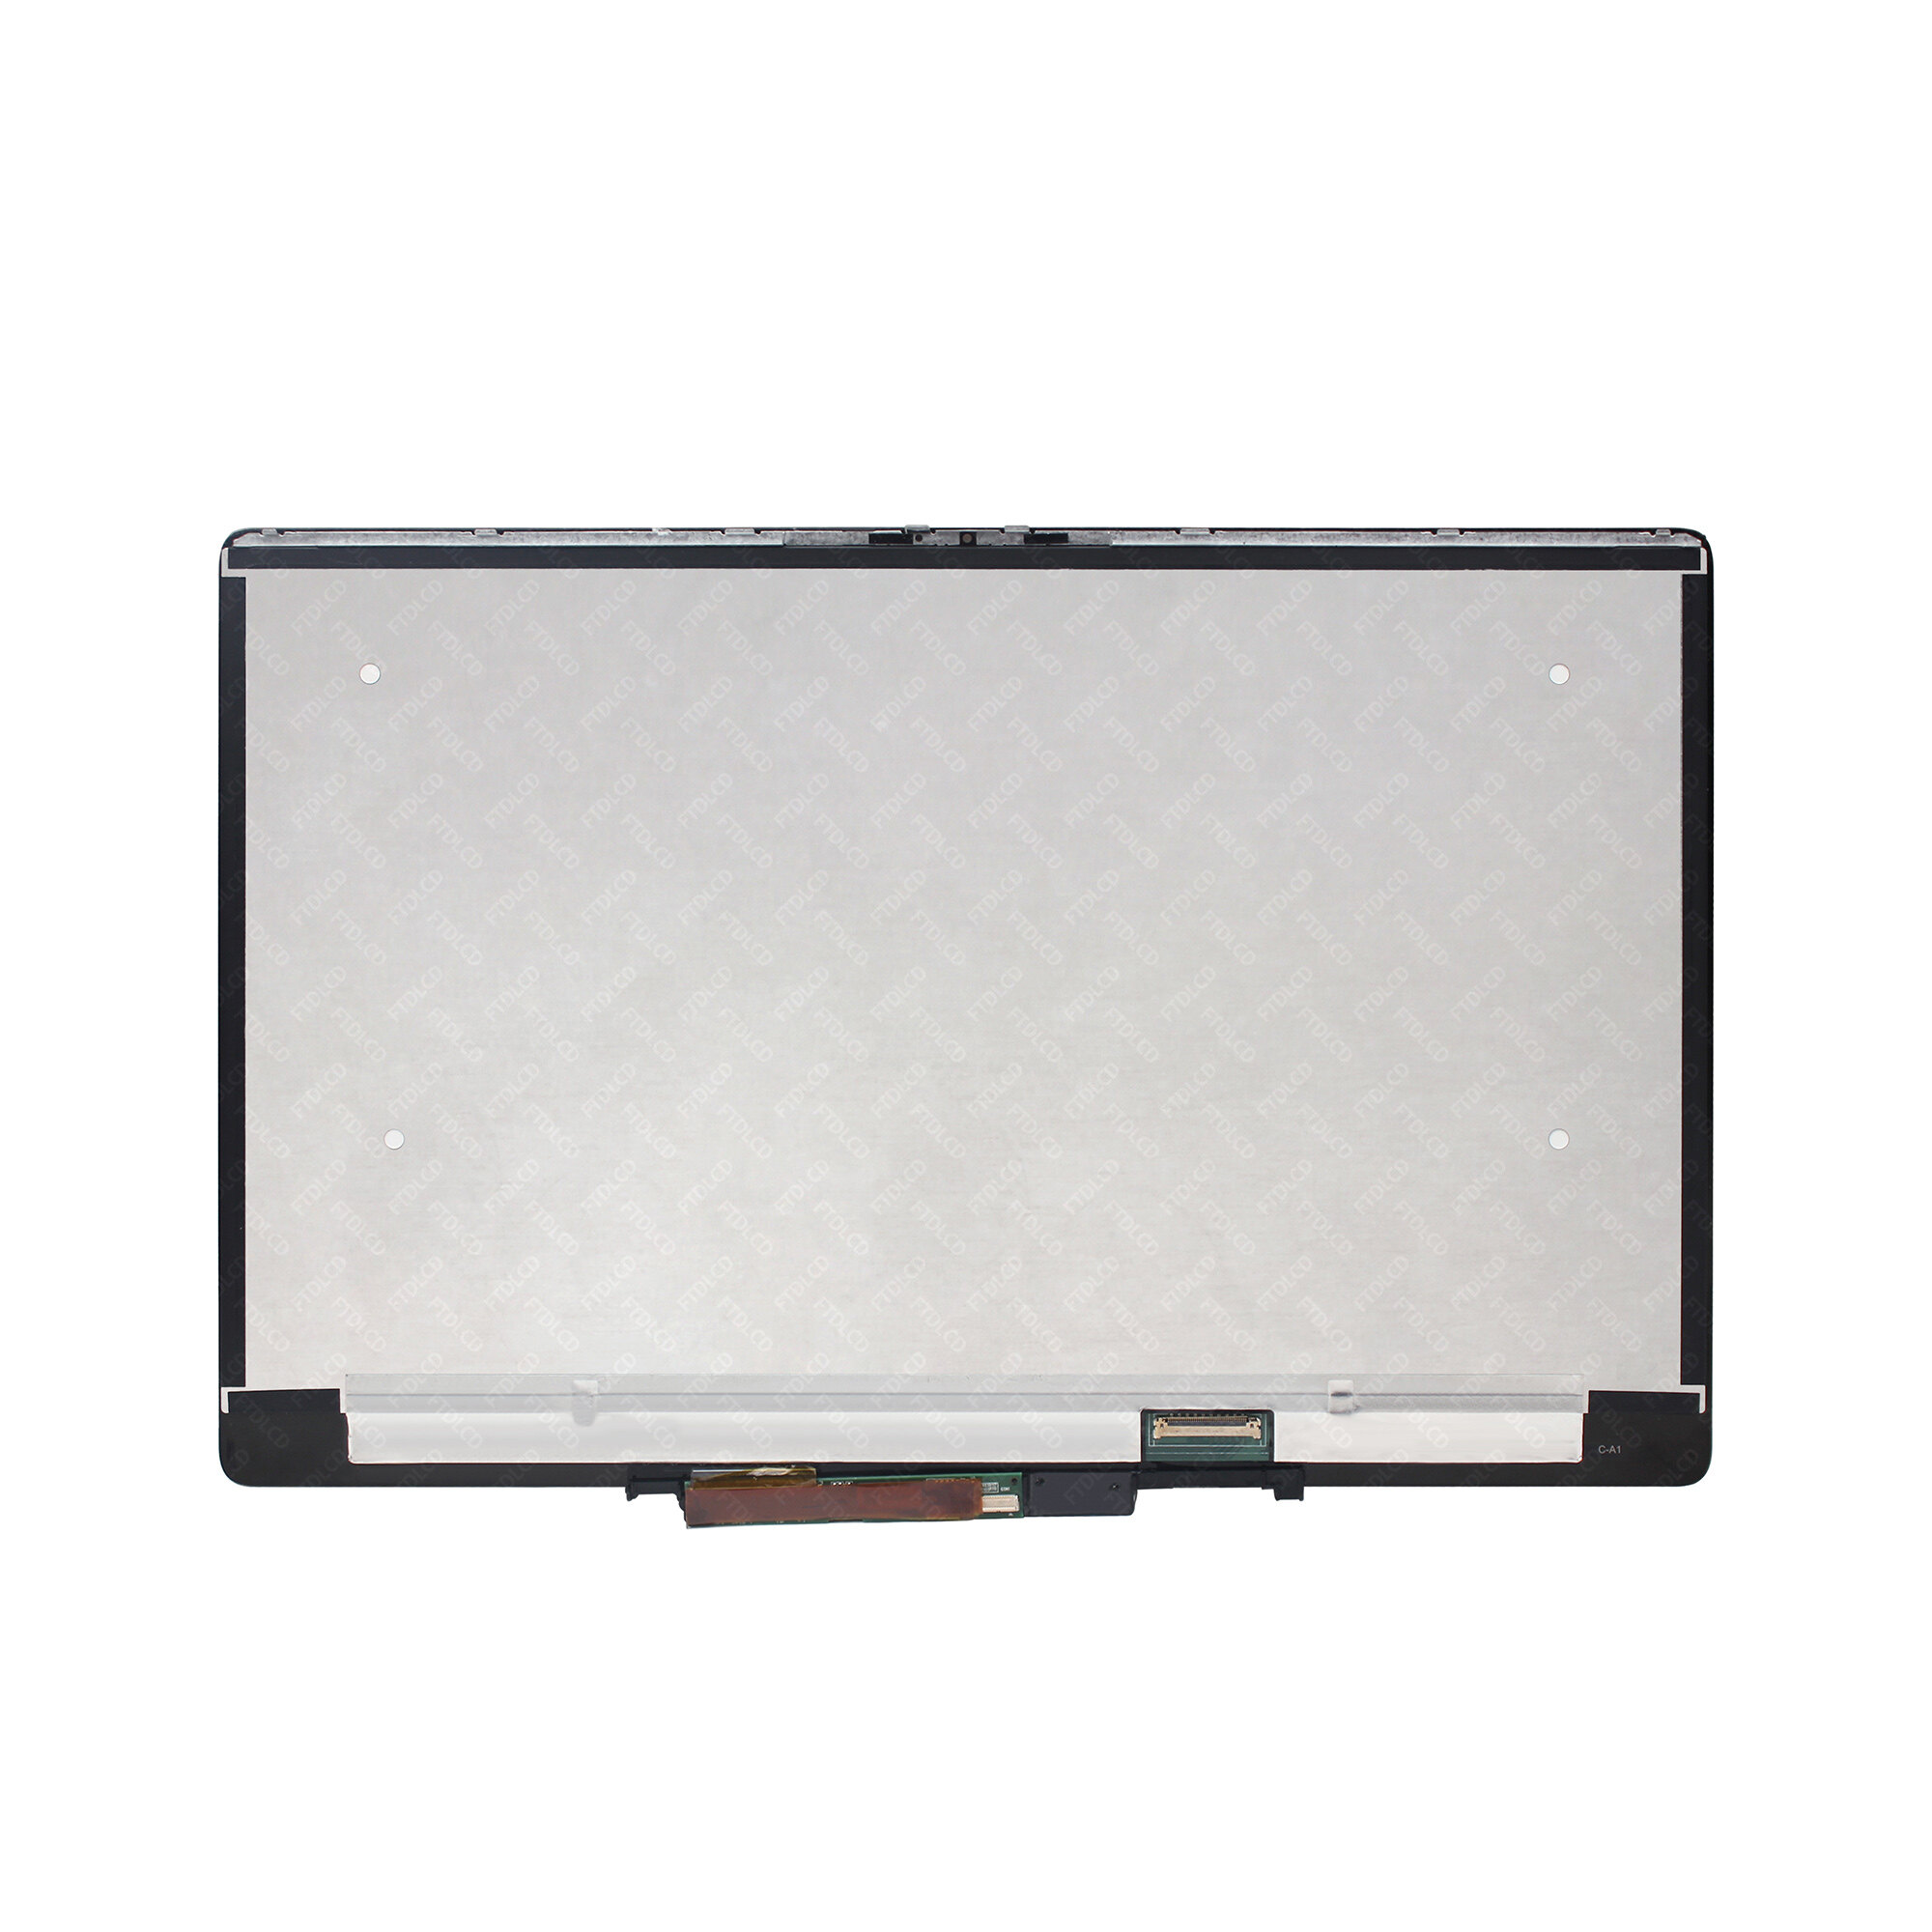 Kreplacement FHD LCD Display Touch Screen Assembly for Dell Inspiron 13 7000 P91G P91G001